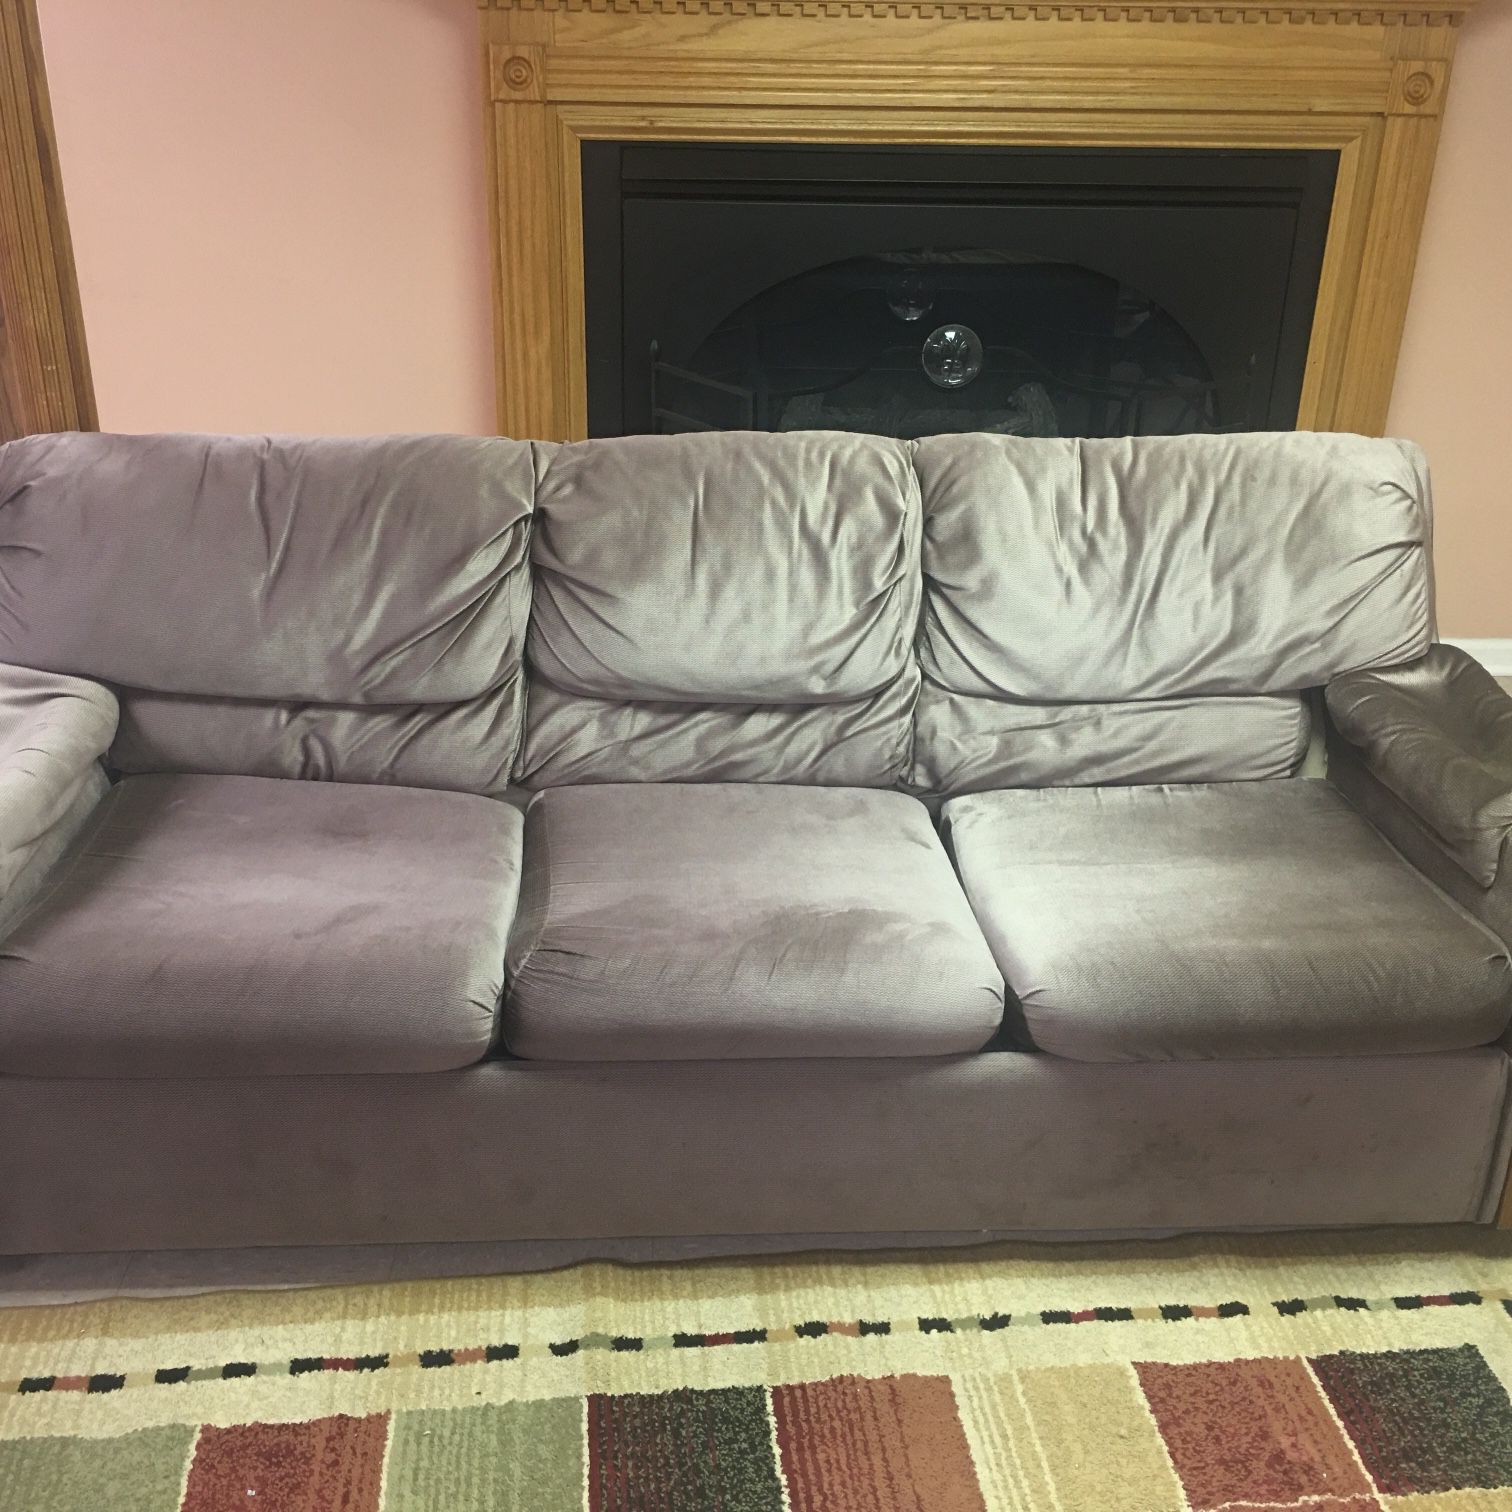 2 Couches: 3 Seat (with Bed) And 2 Seat